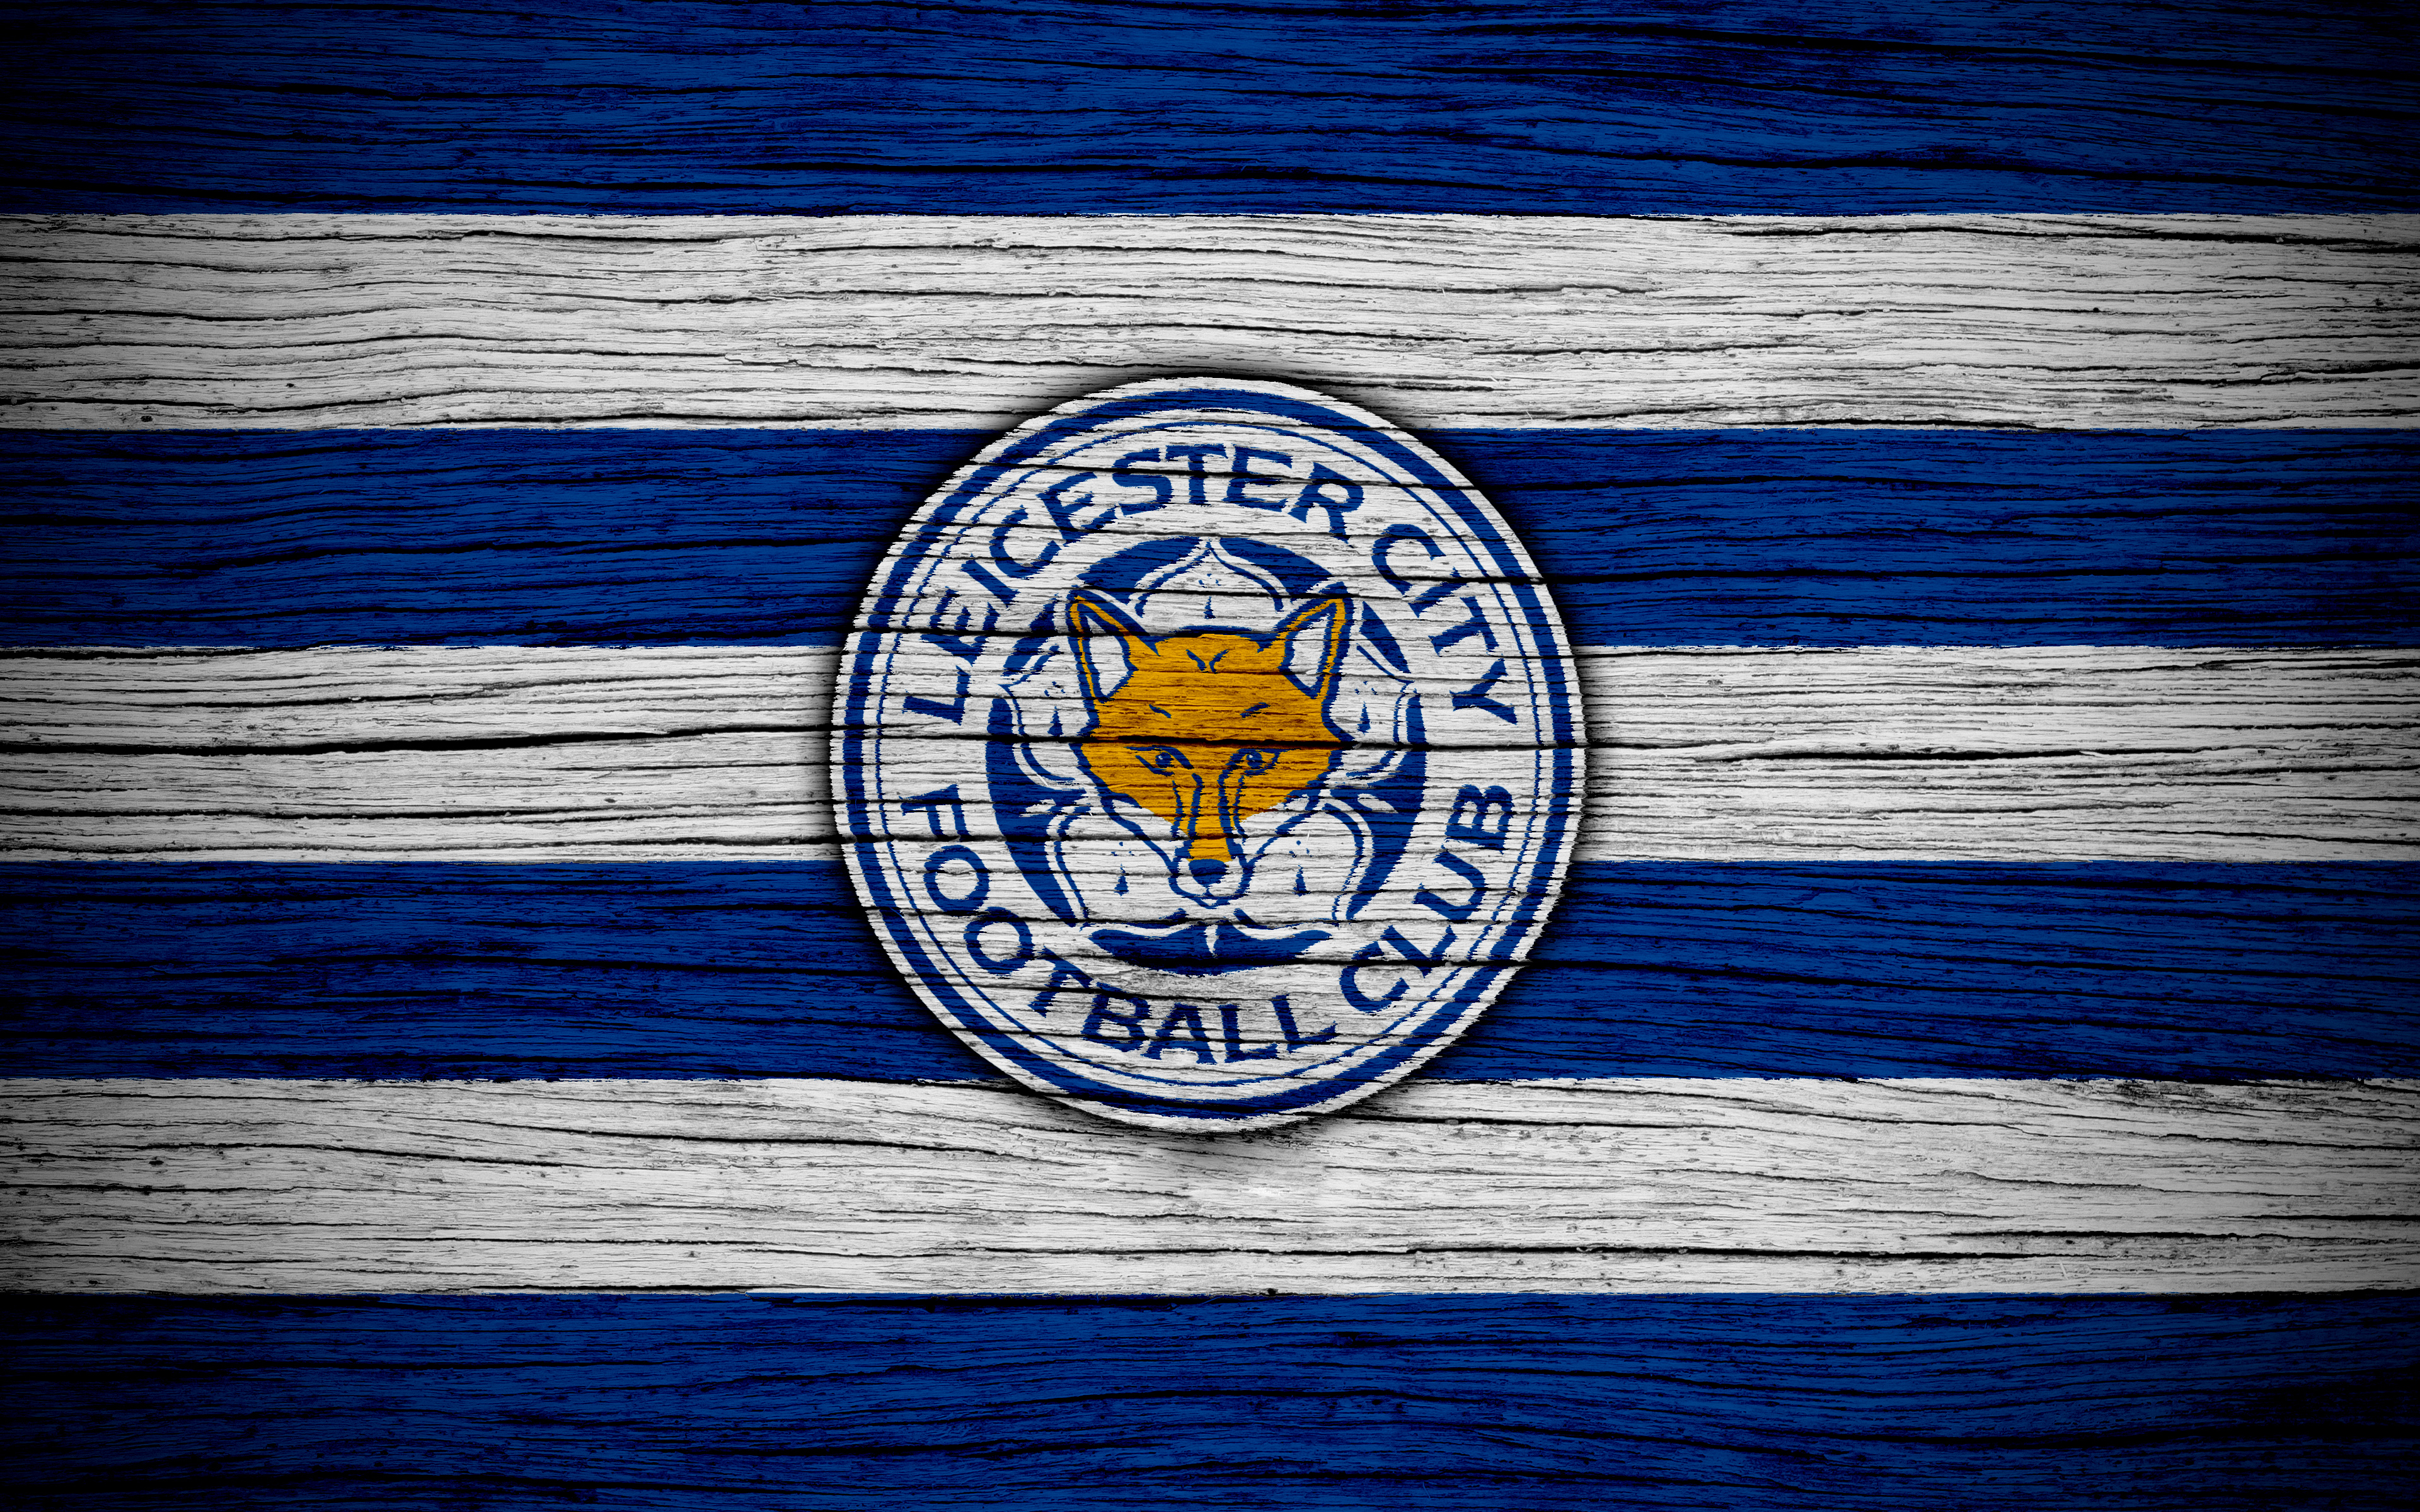 Free Download Leicester City Fc 4k Ultra Hd Wallpaper Background Image 3840x2400 For Your Desktop Mobile Tablet Explore 19 Leicester City F C Wallpapers Leicester City F C Wallpapers Manchester City